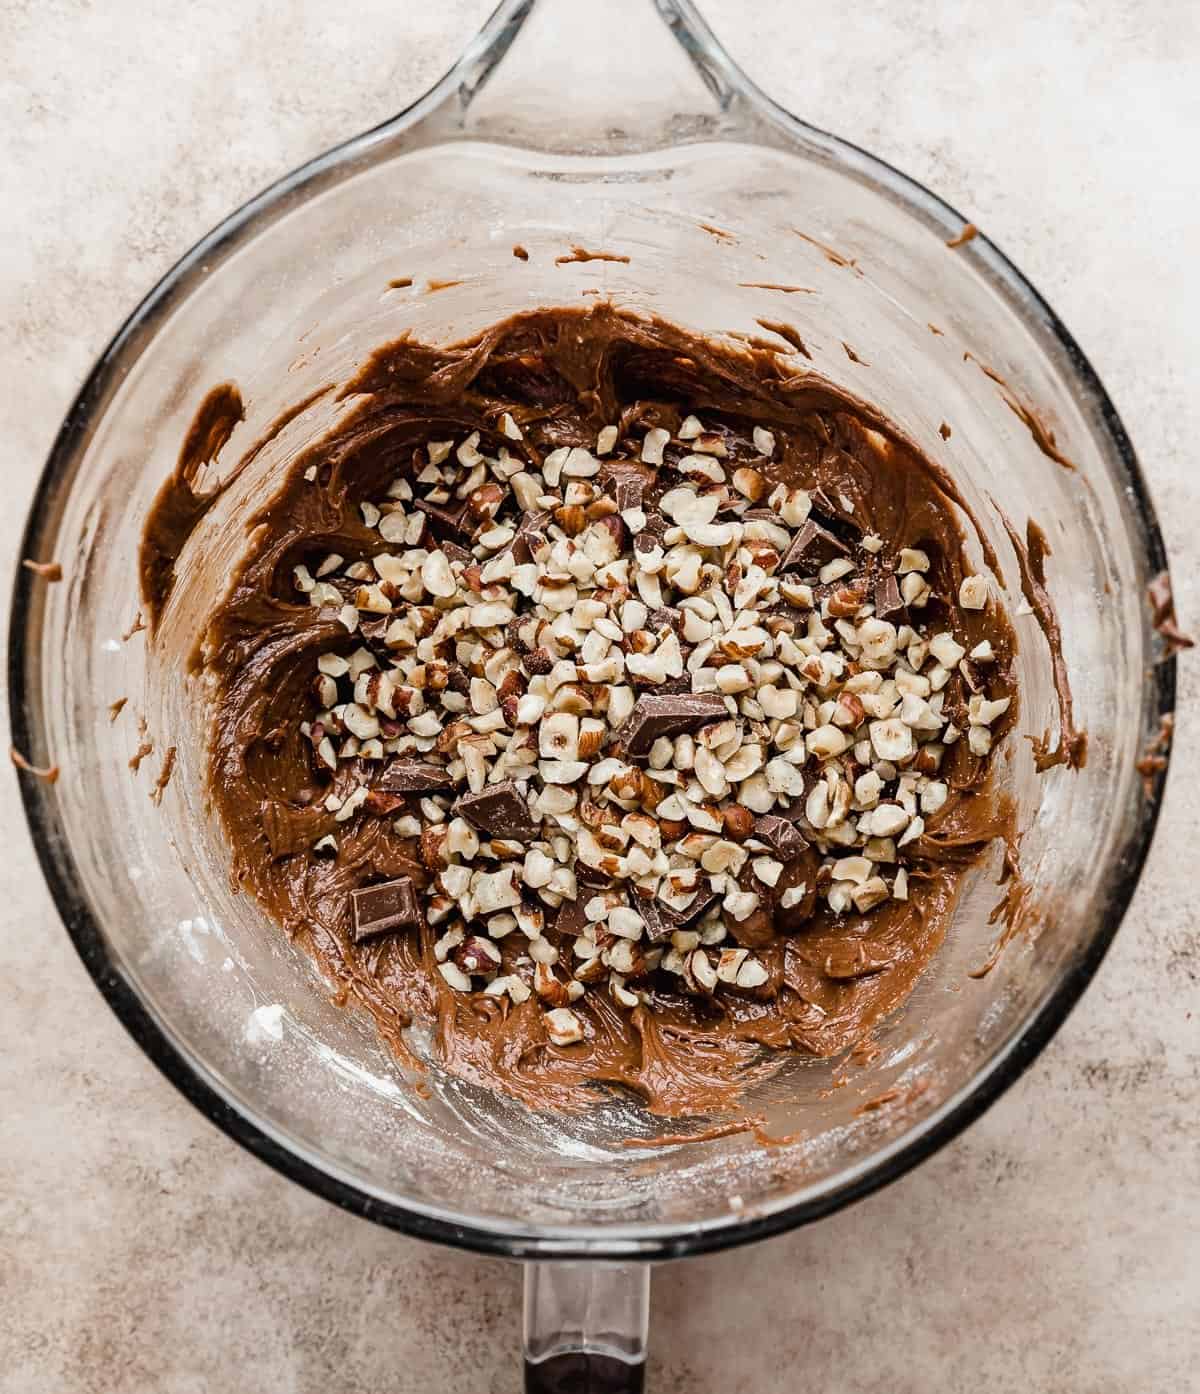 Chopped hazelnuts overtop a Nutella brownie batter in a glass bowl.